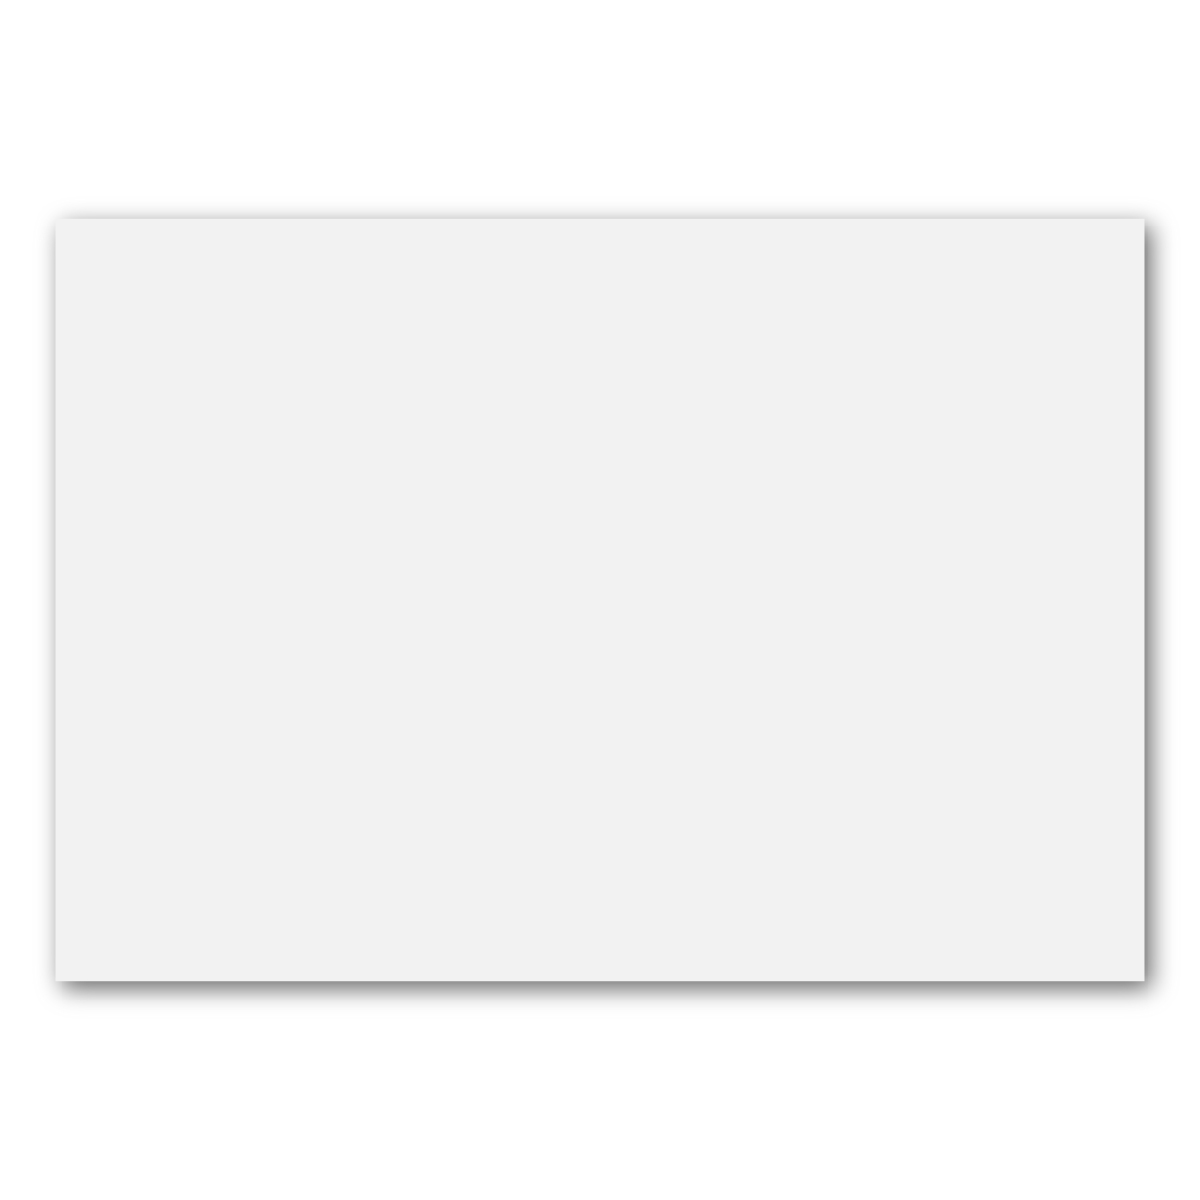 White Matte Greeting Card (14 Point/ 2 Sided)